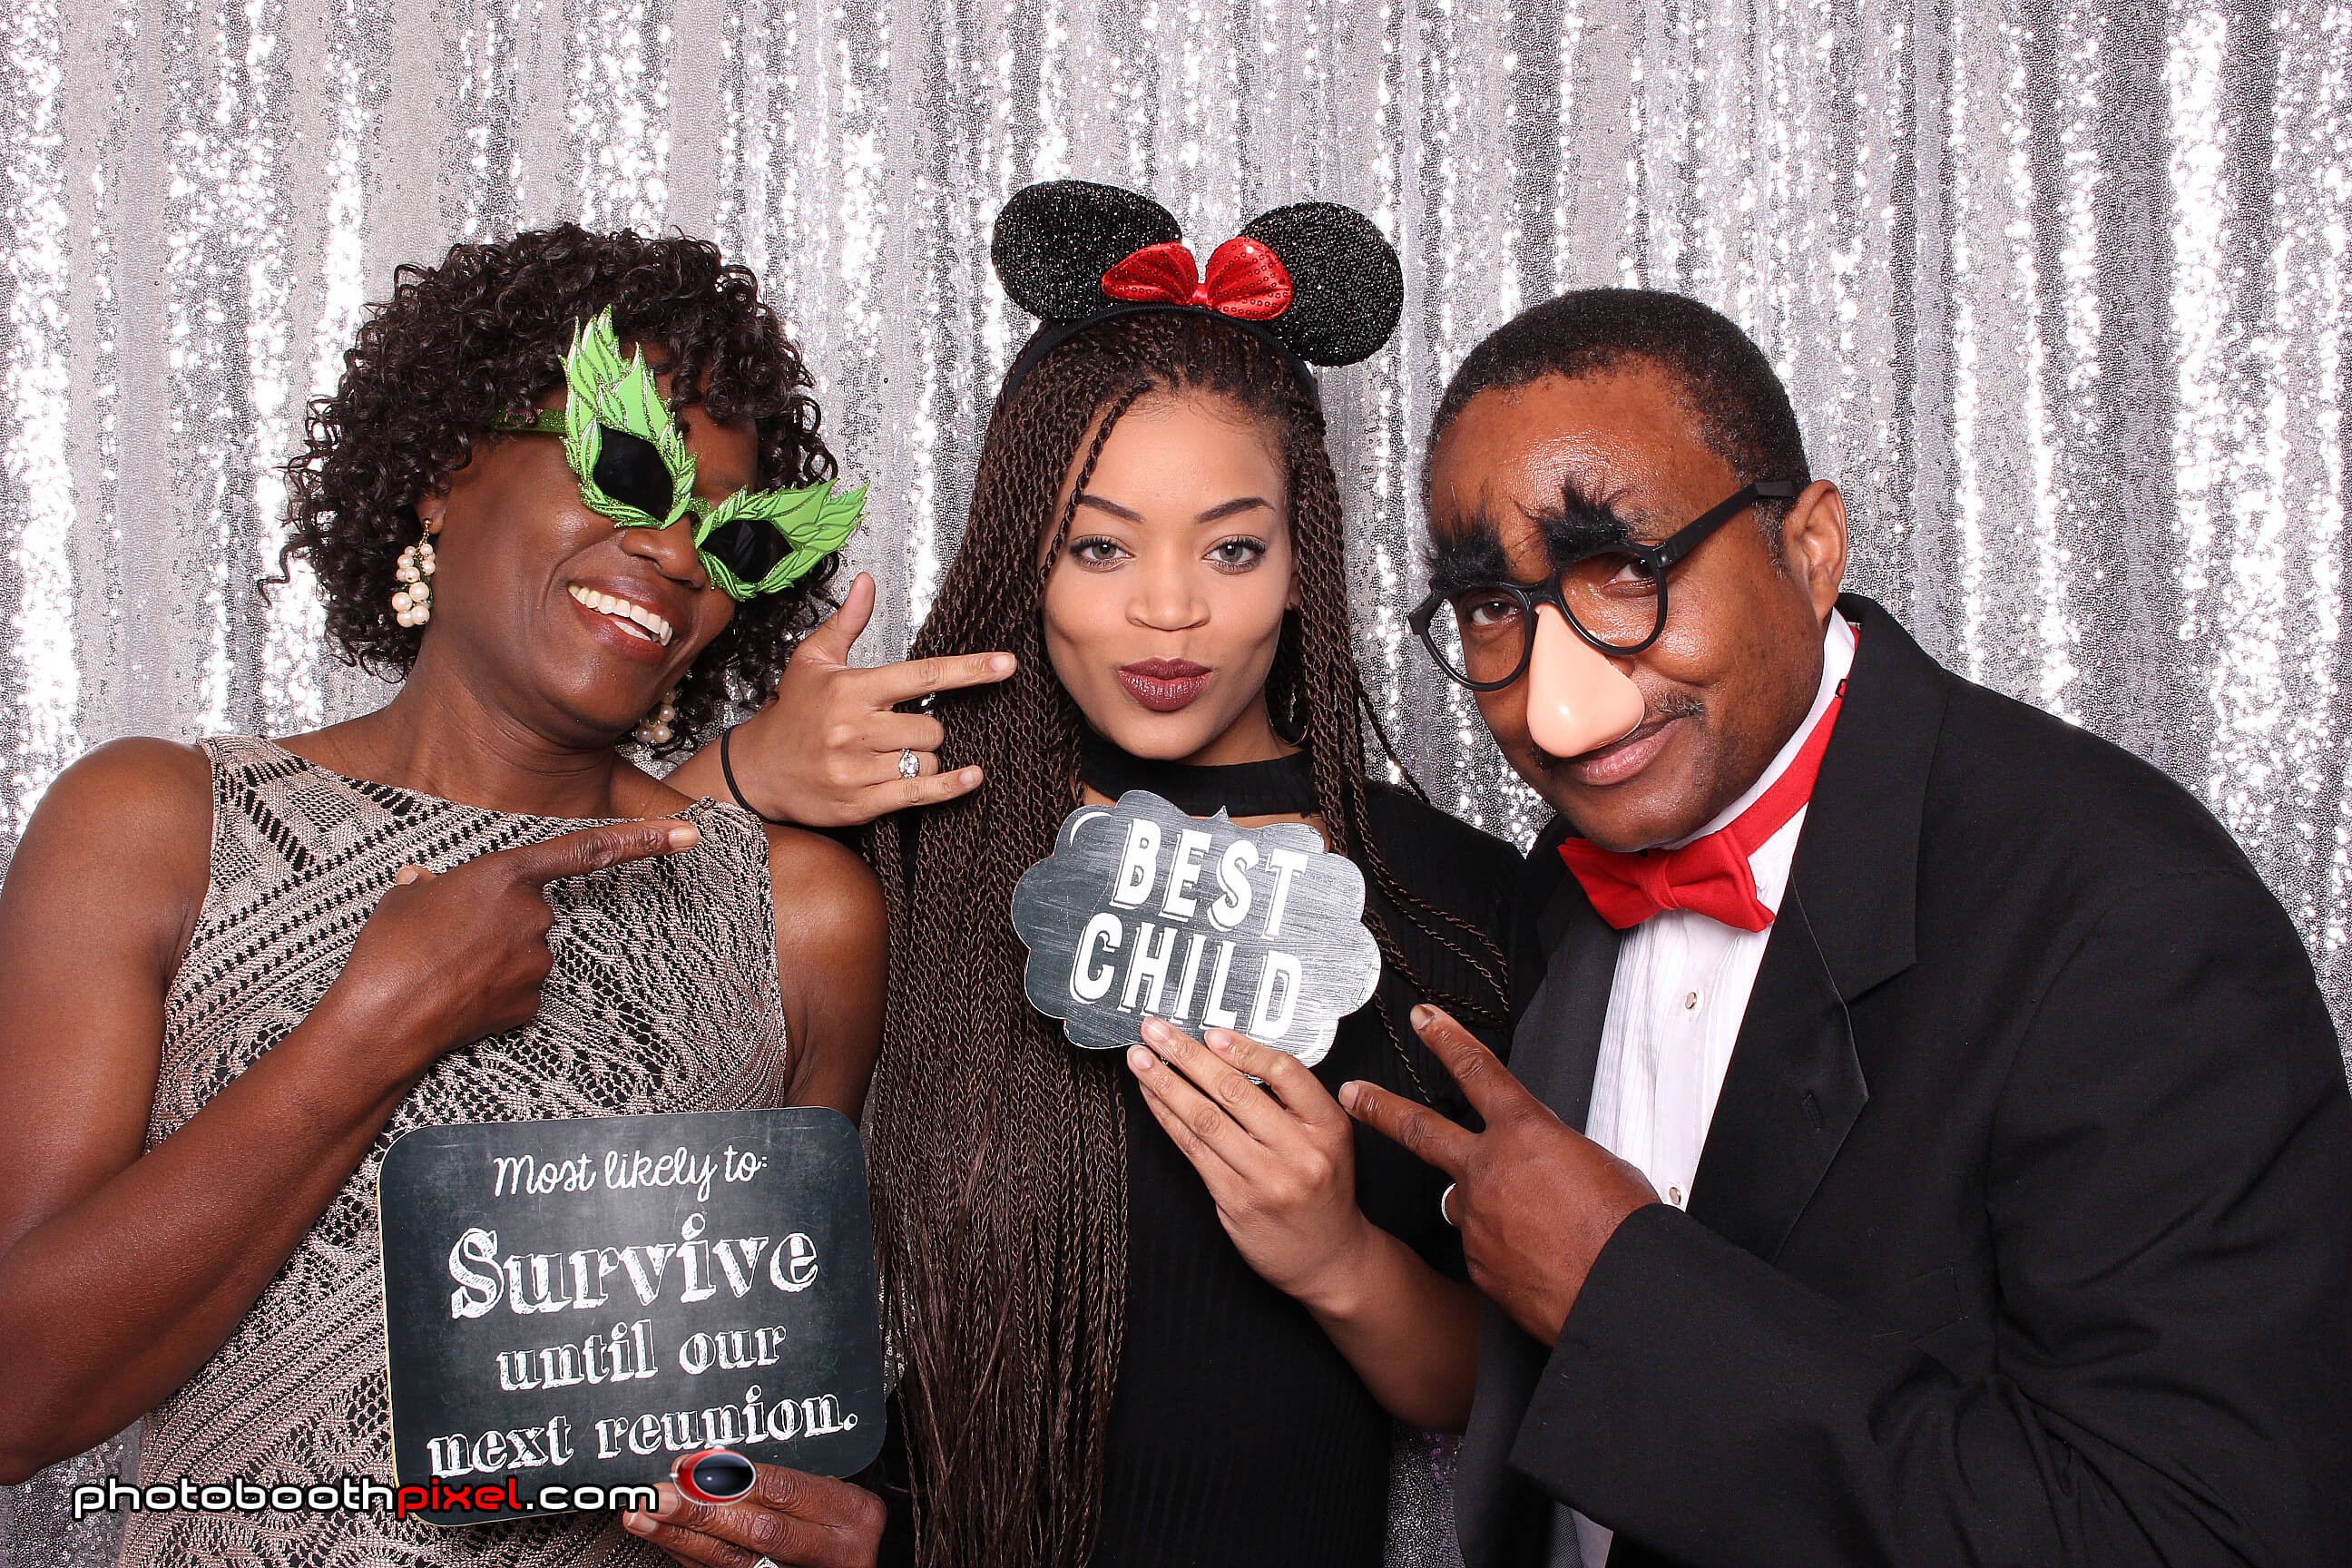 photo booth jacksonville embassy suites jacksonville baymeadows